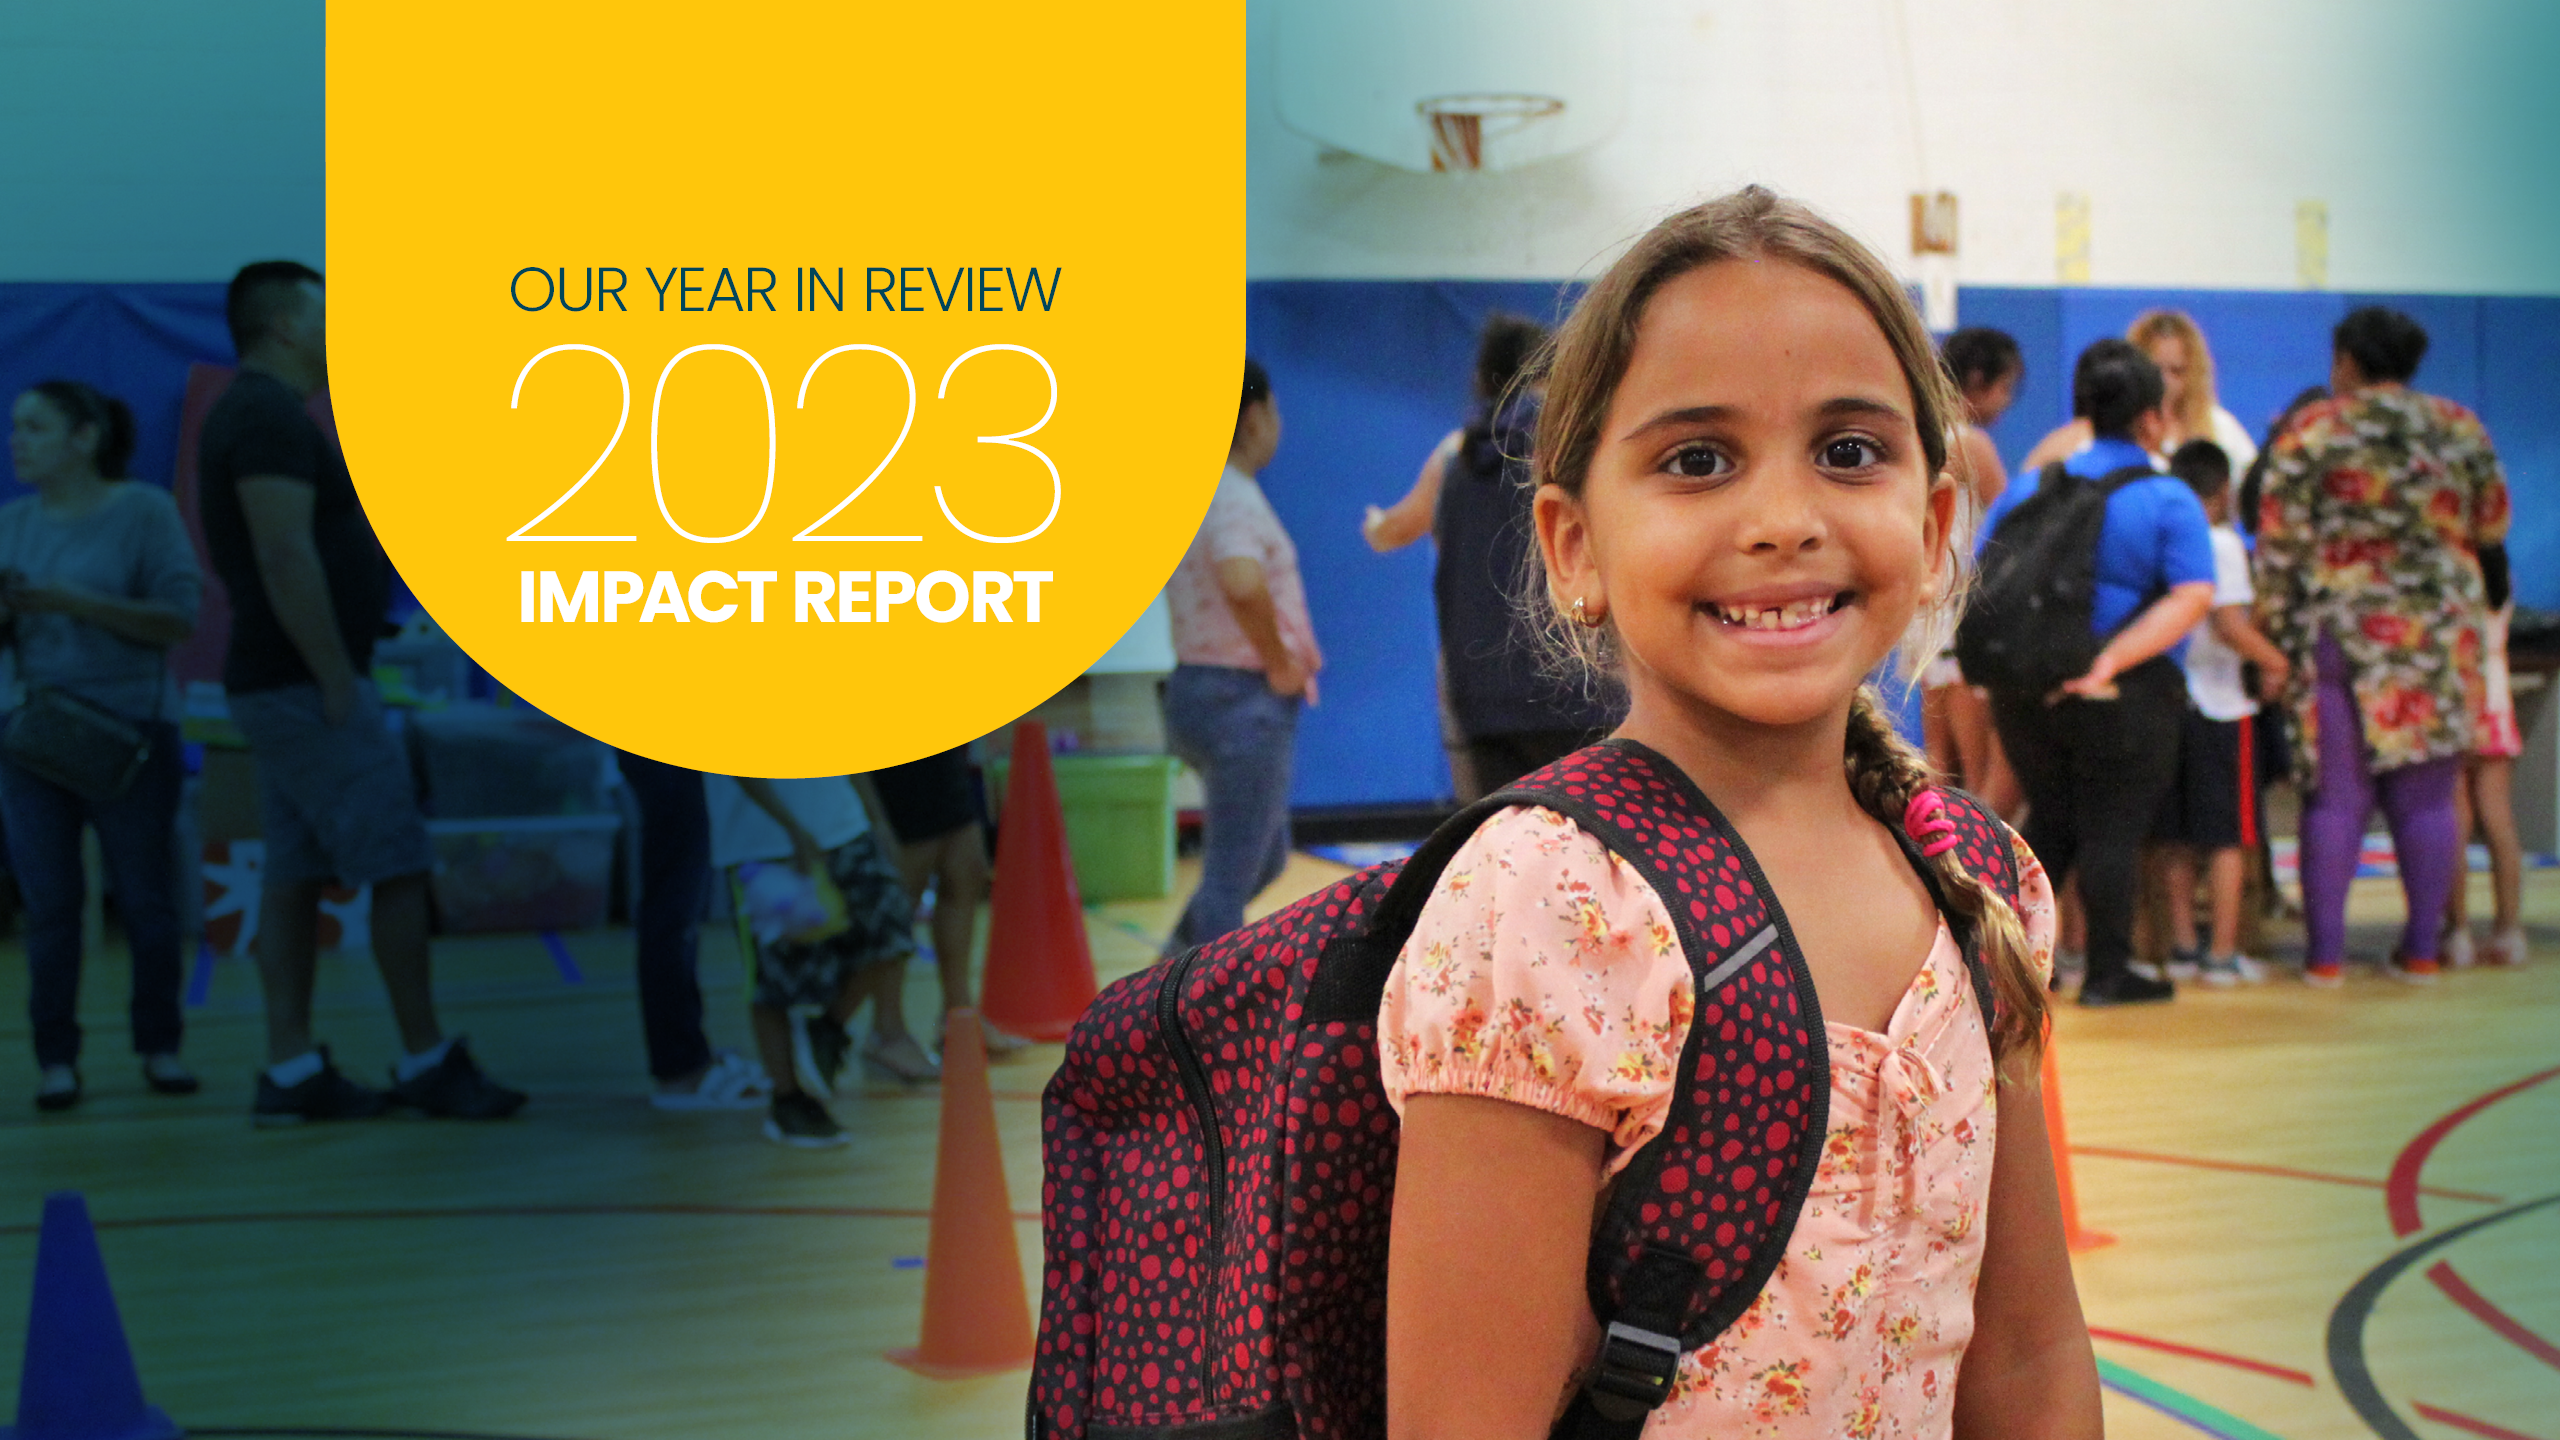 Image of young girl smiling and wearing a backpack. Yellow rounded rectangle graphic with "OUR YEAR IN REVIEW" written in dark teal. Below that, "2023 IMPACT REPORT" in white text. 